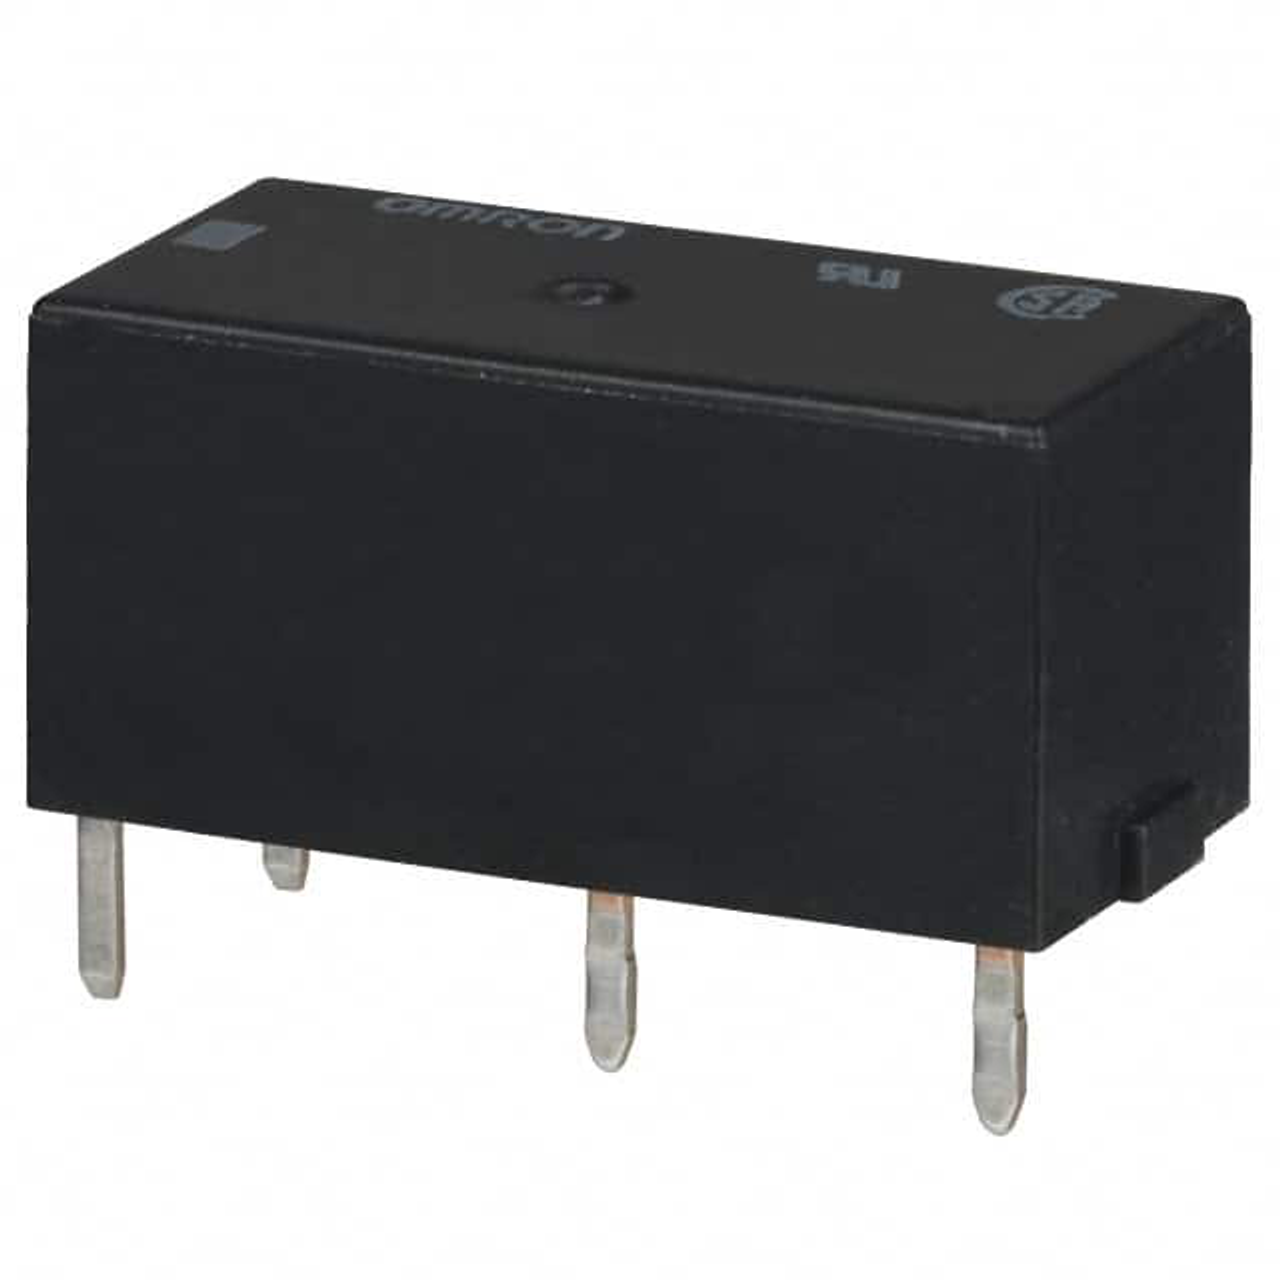 Omron G6B-1174P-1-US-DC24 Power Relays